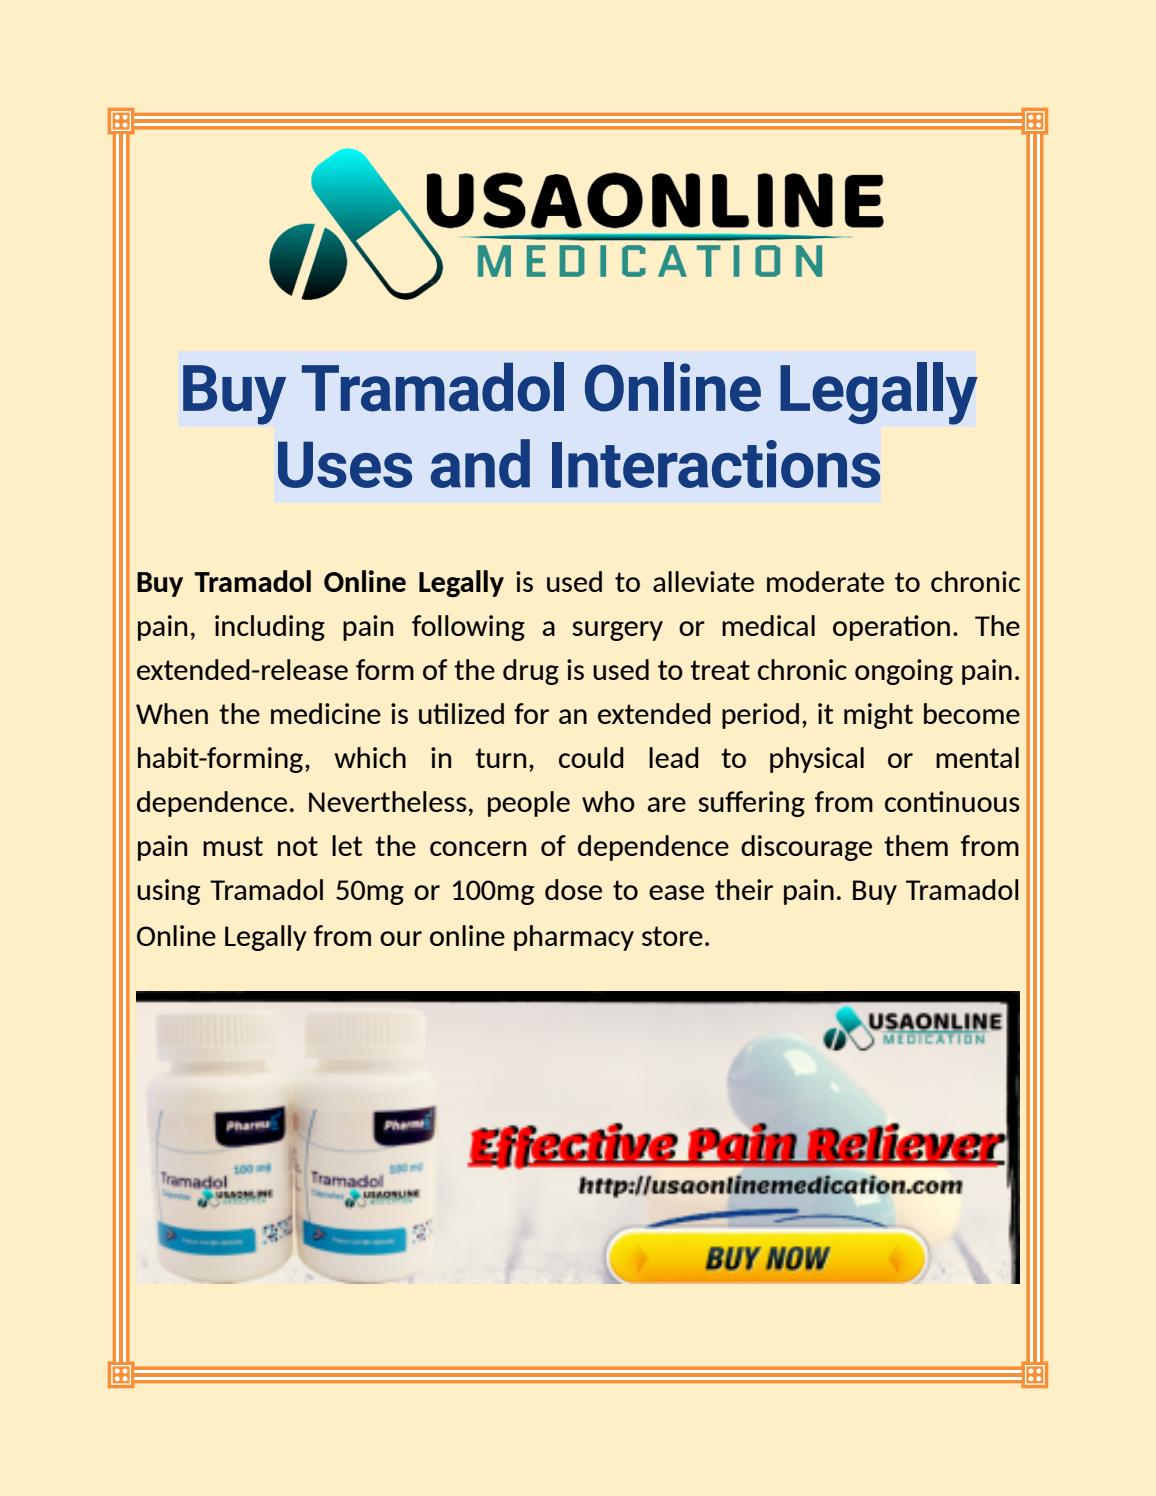 how to order tramadol online legally